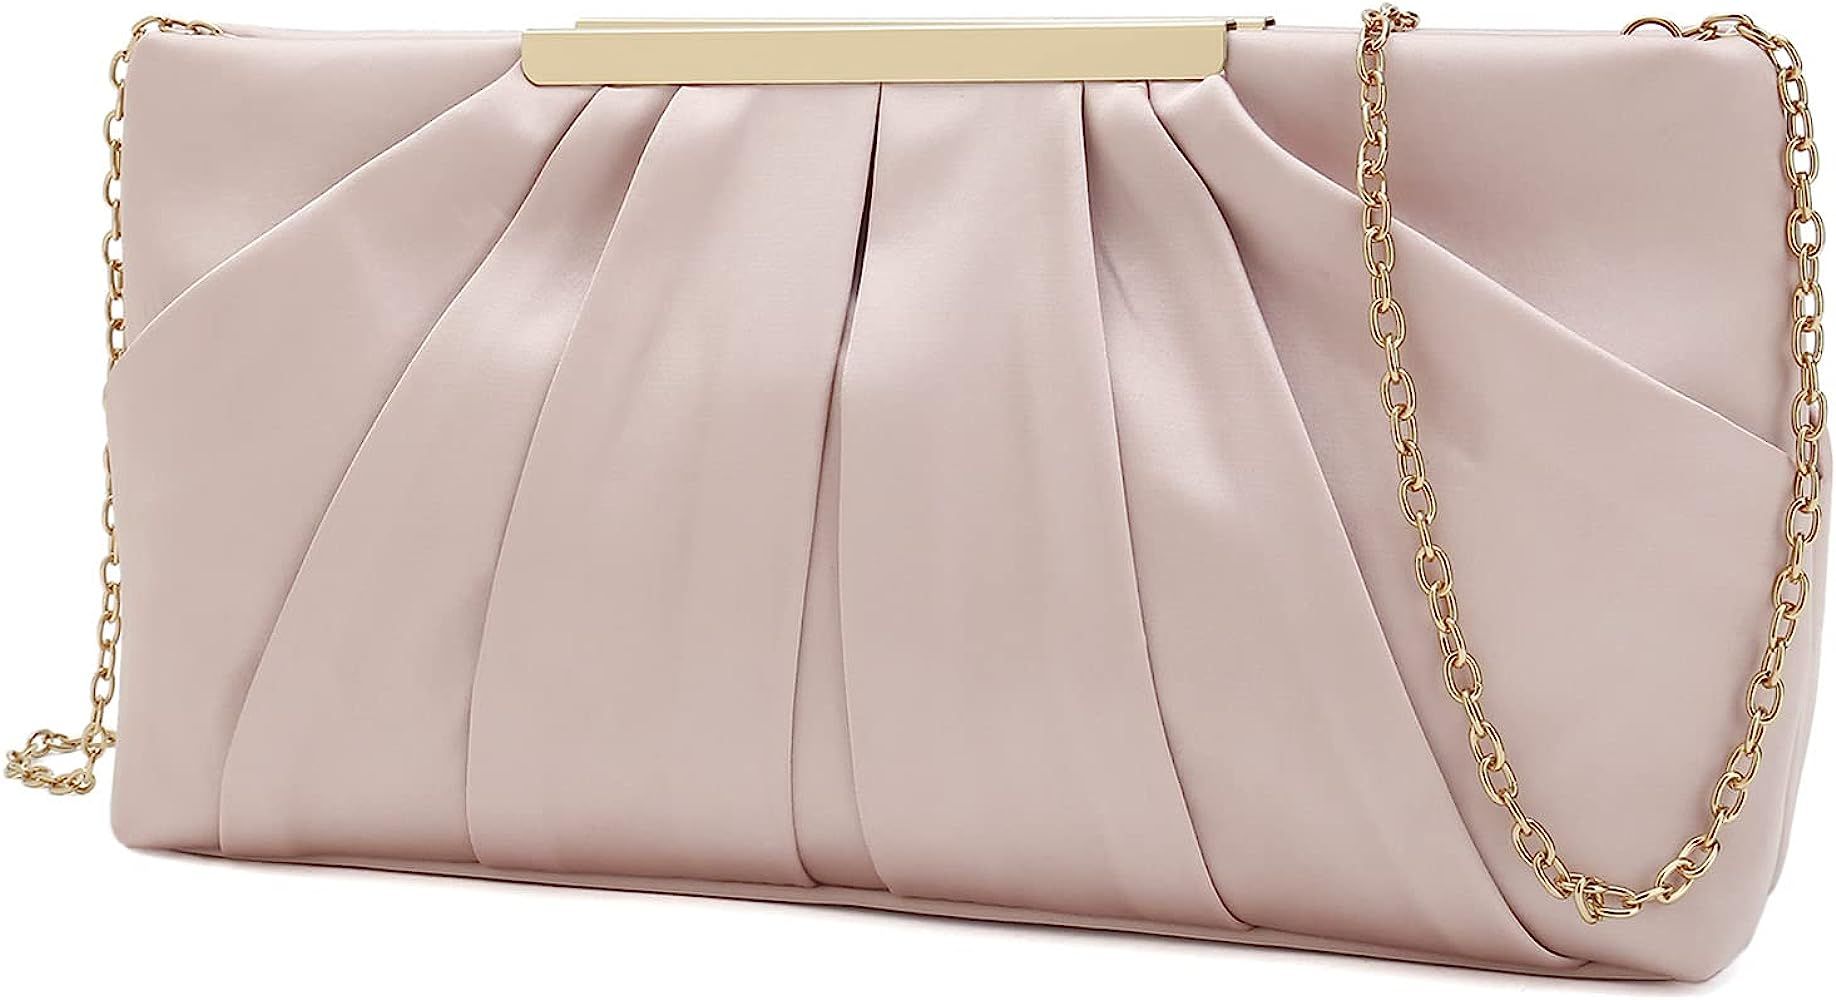 CHARMING TAILOR Clutch Evening Bag Elegant Pleated Satin Formal Handbag Simple Classy Purse for Wome | Amazon (US)